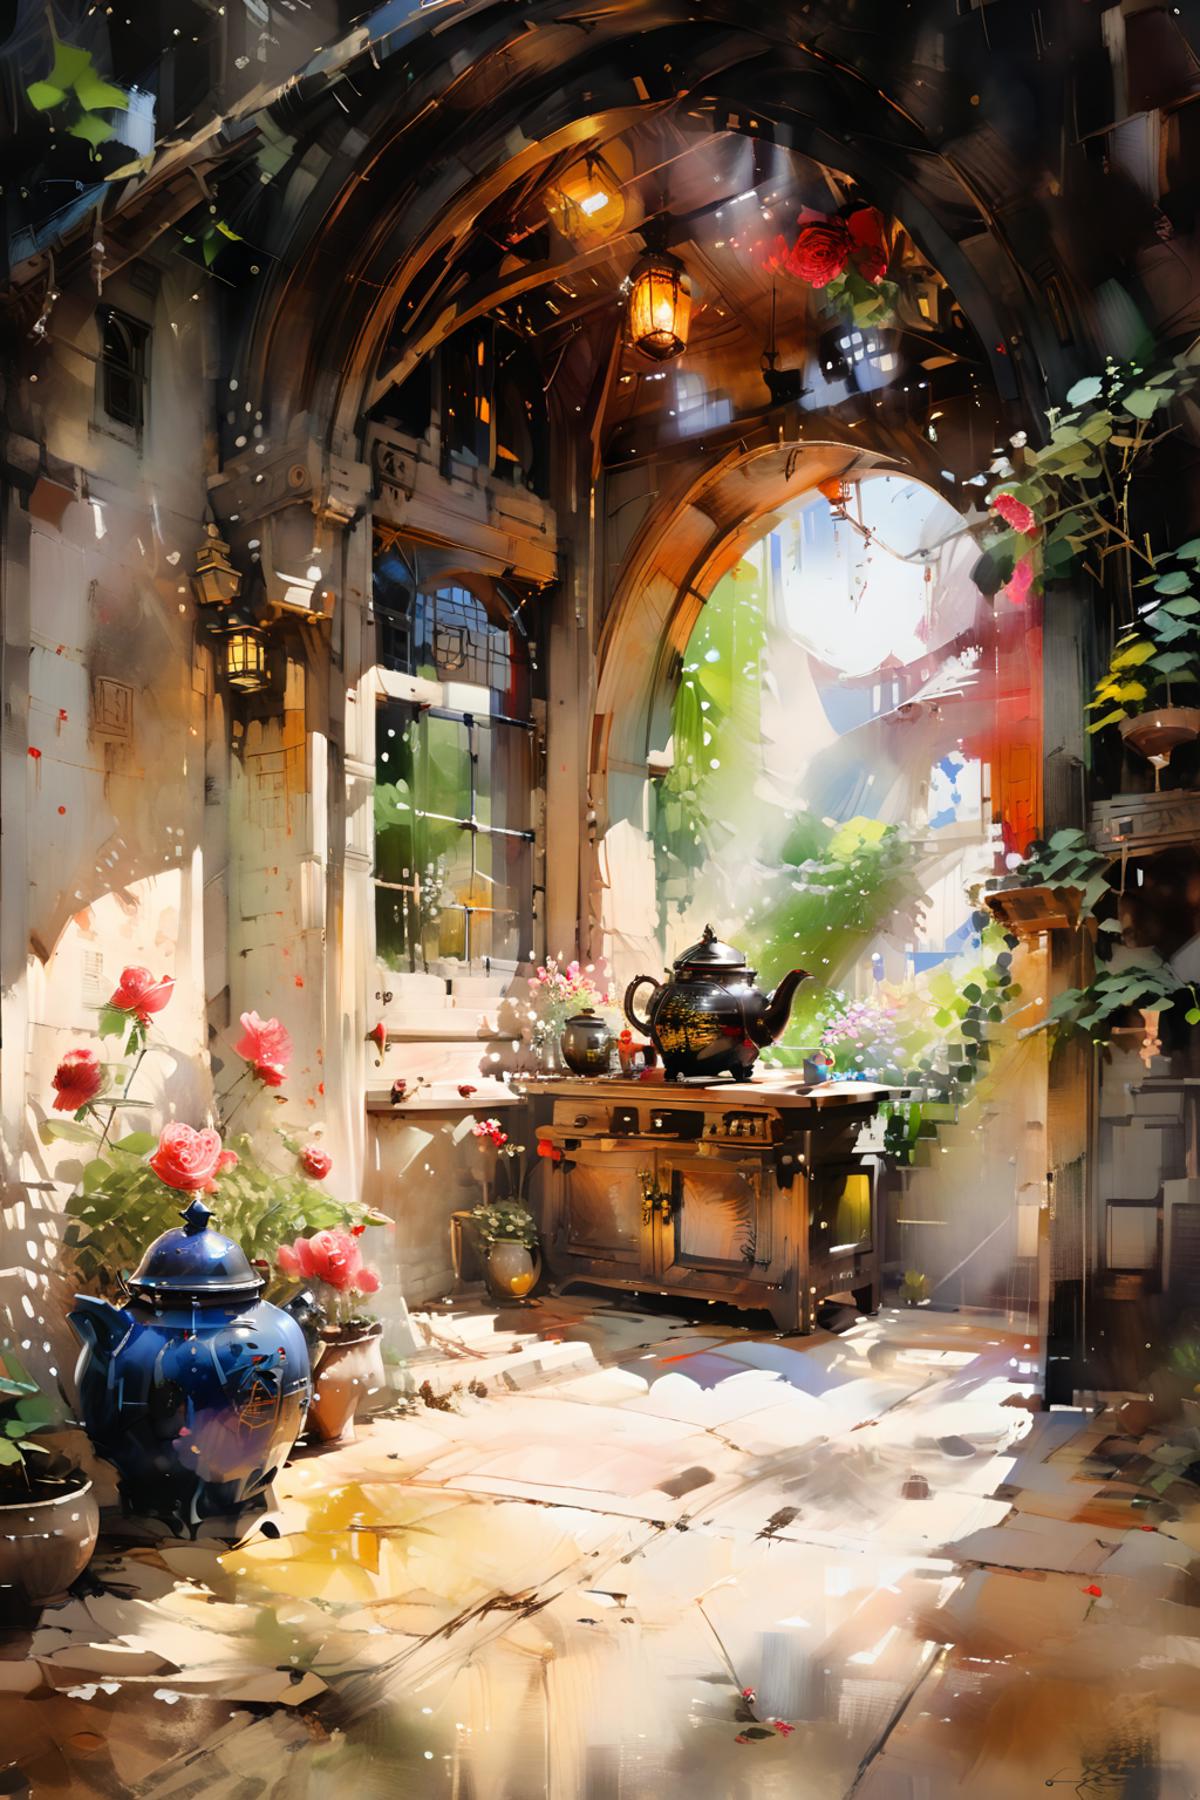 【SDXL】Oil And Watercolor Painting | Dataset image by CHINGEL